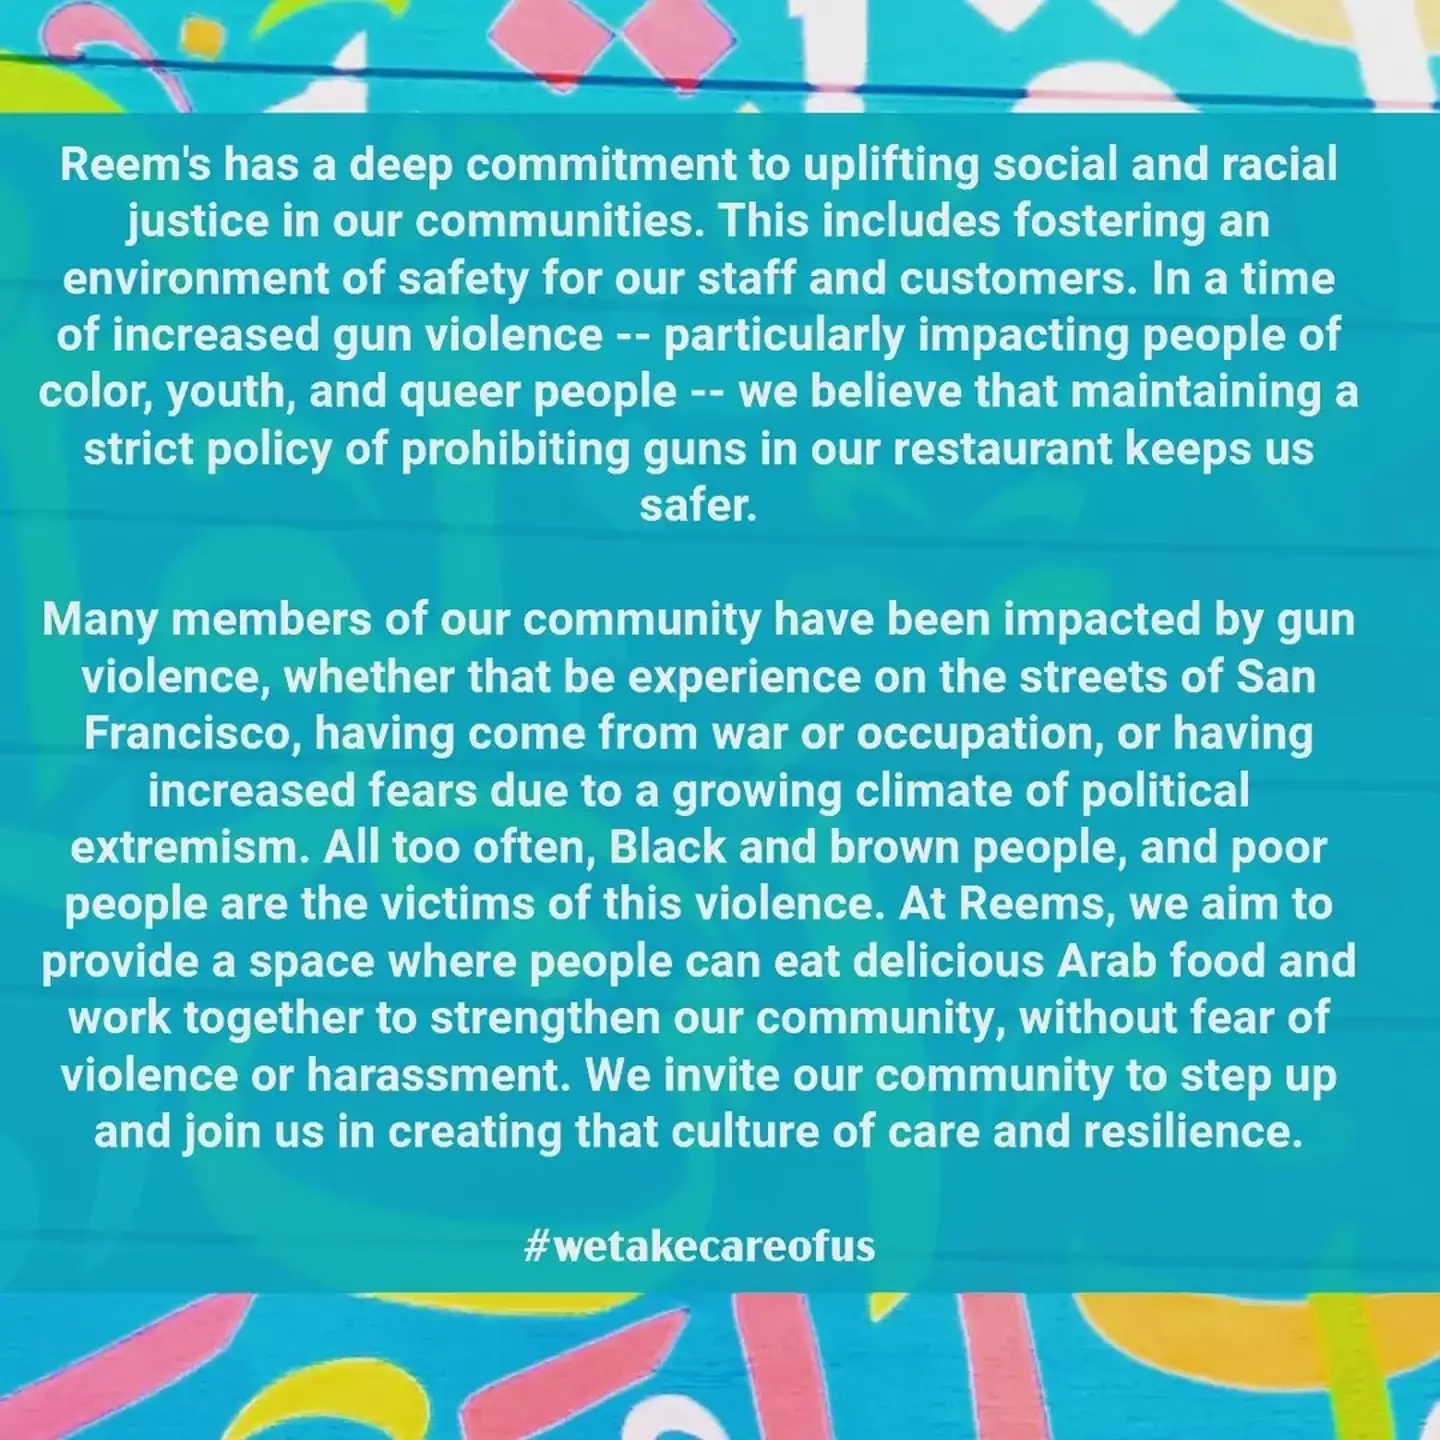 The local chain gave a lengthy statement on social media, which explained their anti-gun policy.